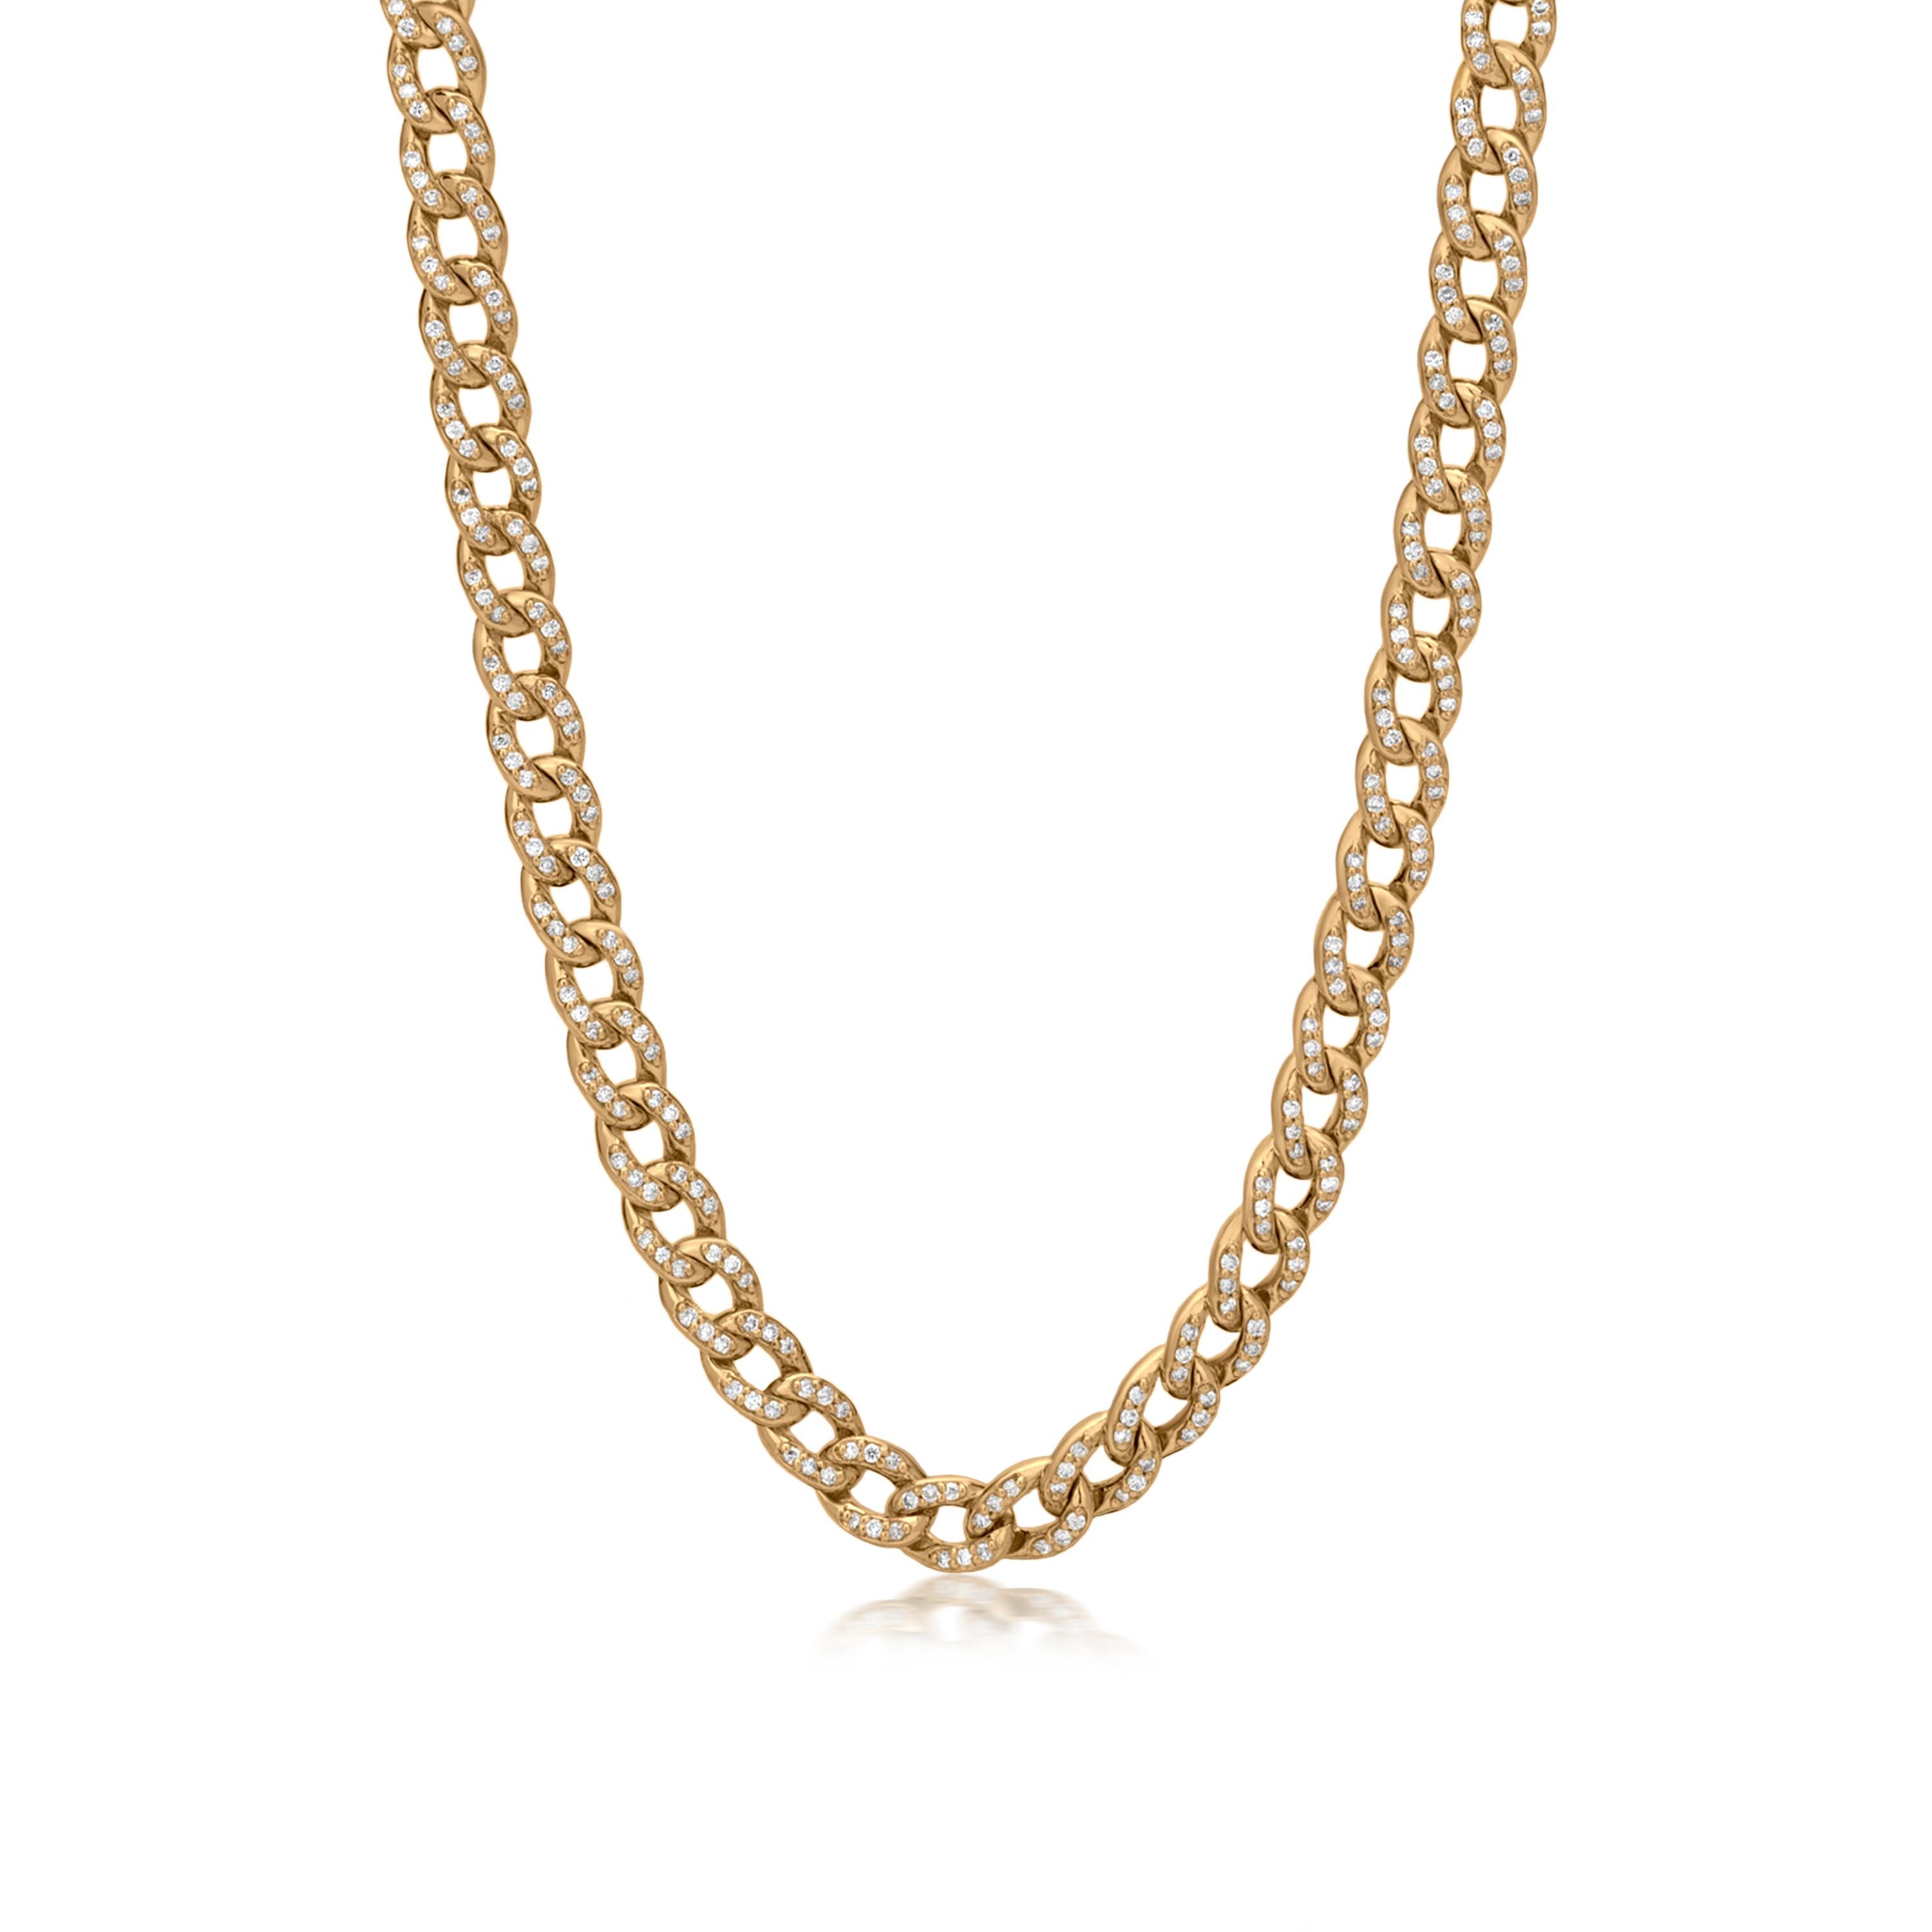 Round Cut Nigaam 1.45 Carat T.W. White Diamond Curb Chain Link Necklace in 18k Yellow Gold